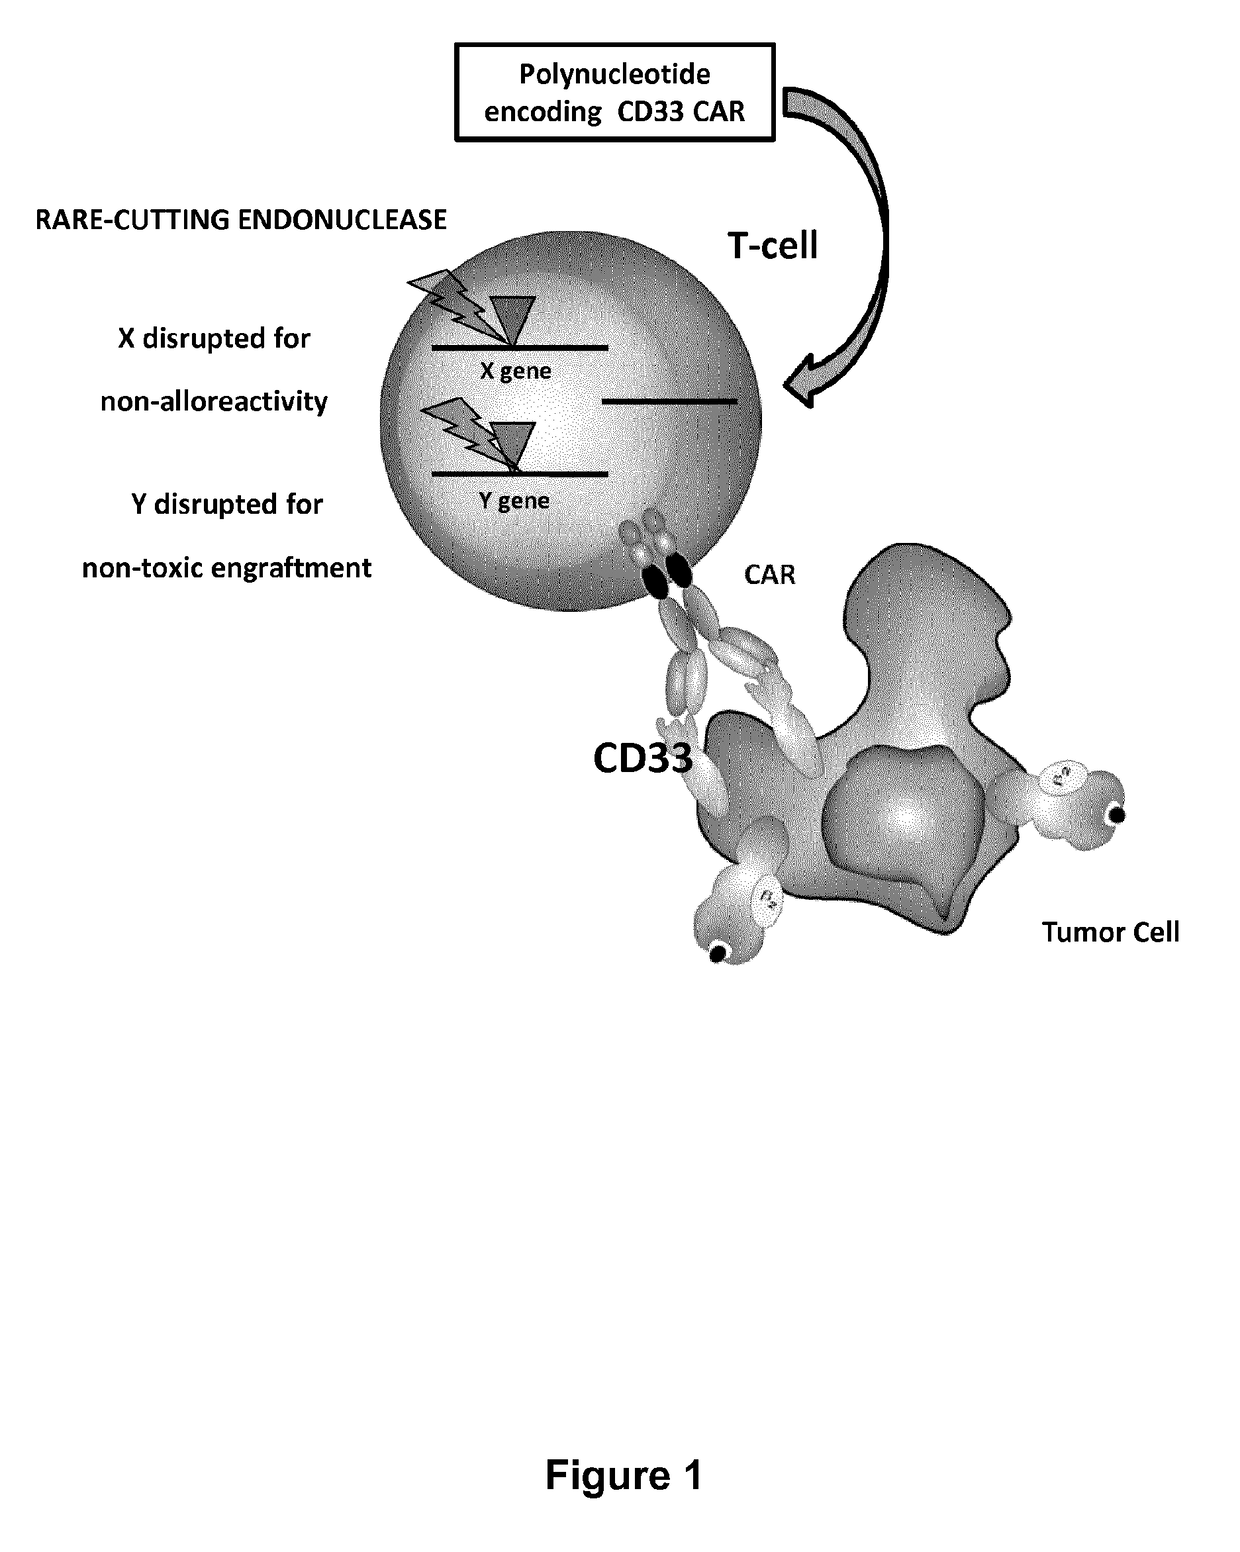 Cd33 specific chimeric antigen receptors for cancer immunotherapy